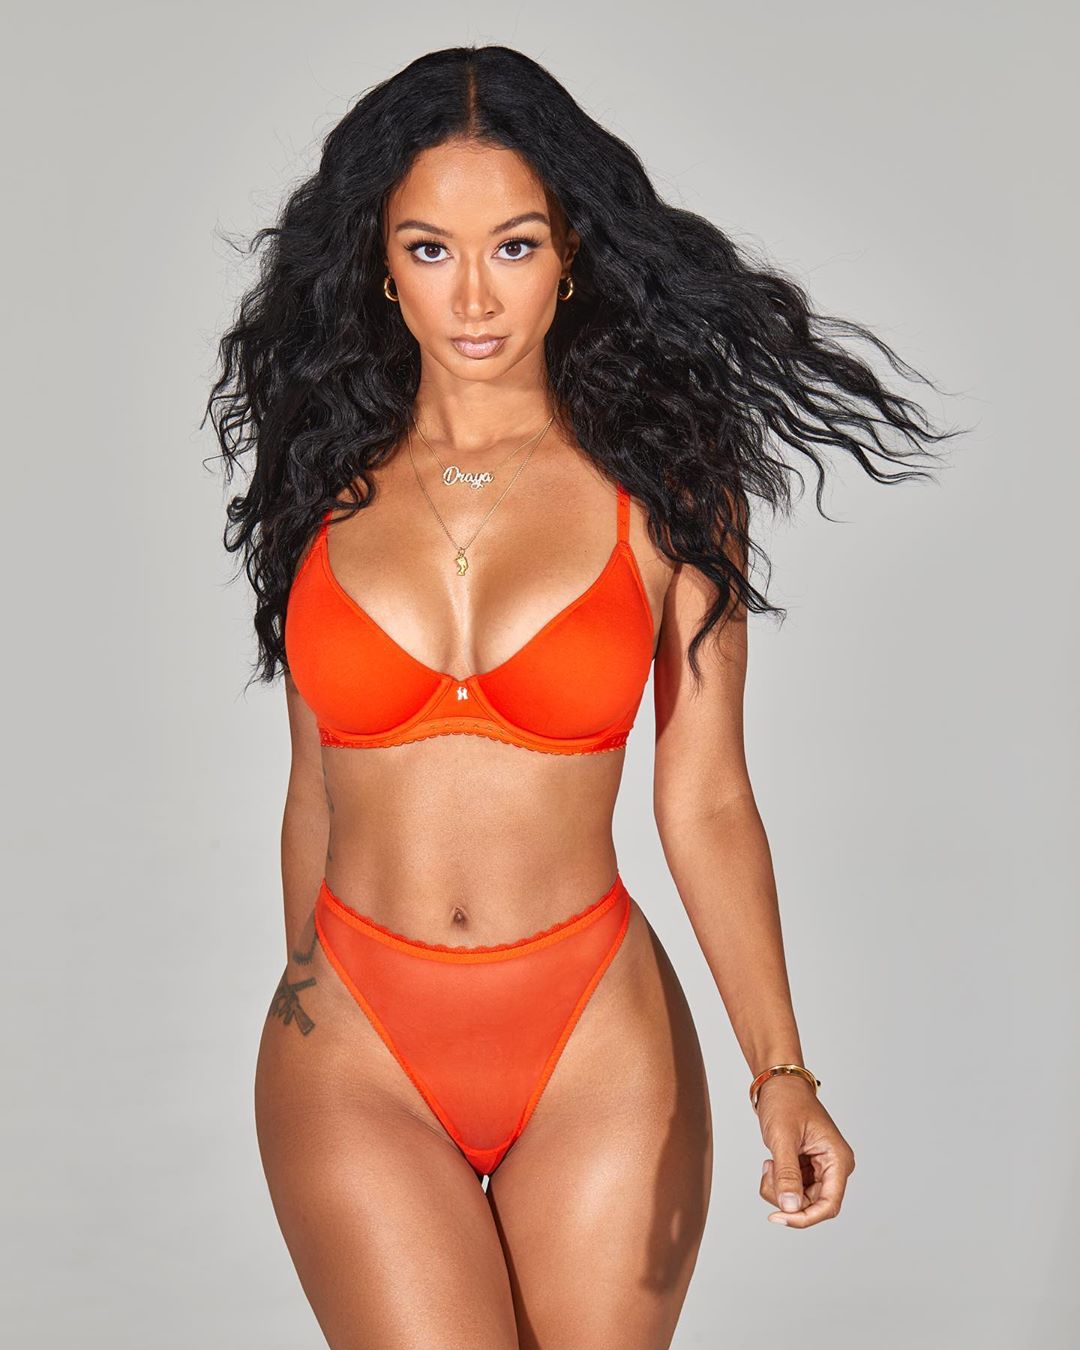 Photos n°9 : Draya Michele Goes Jacket Only!